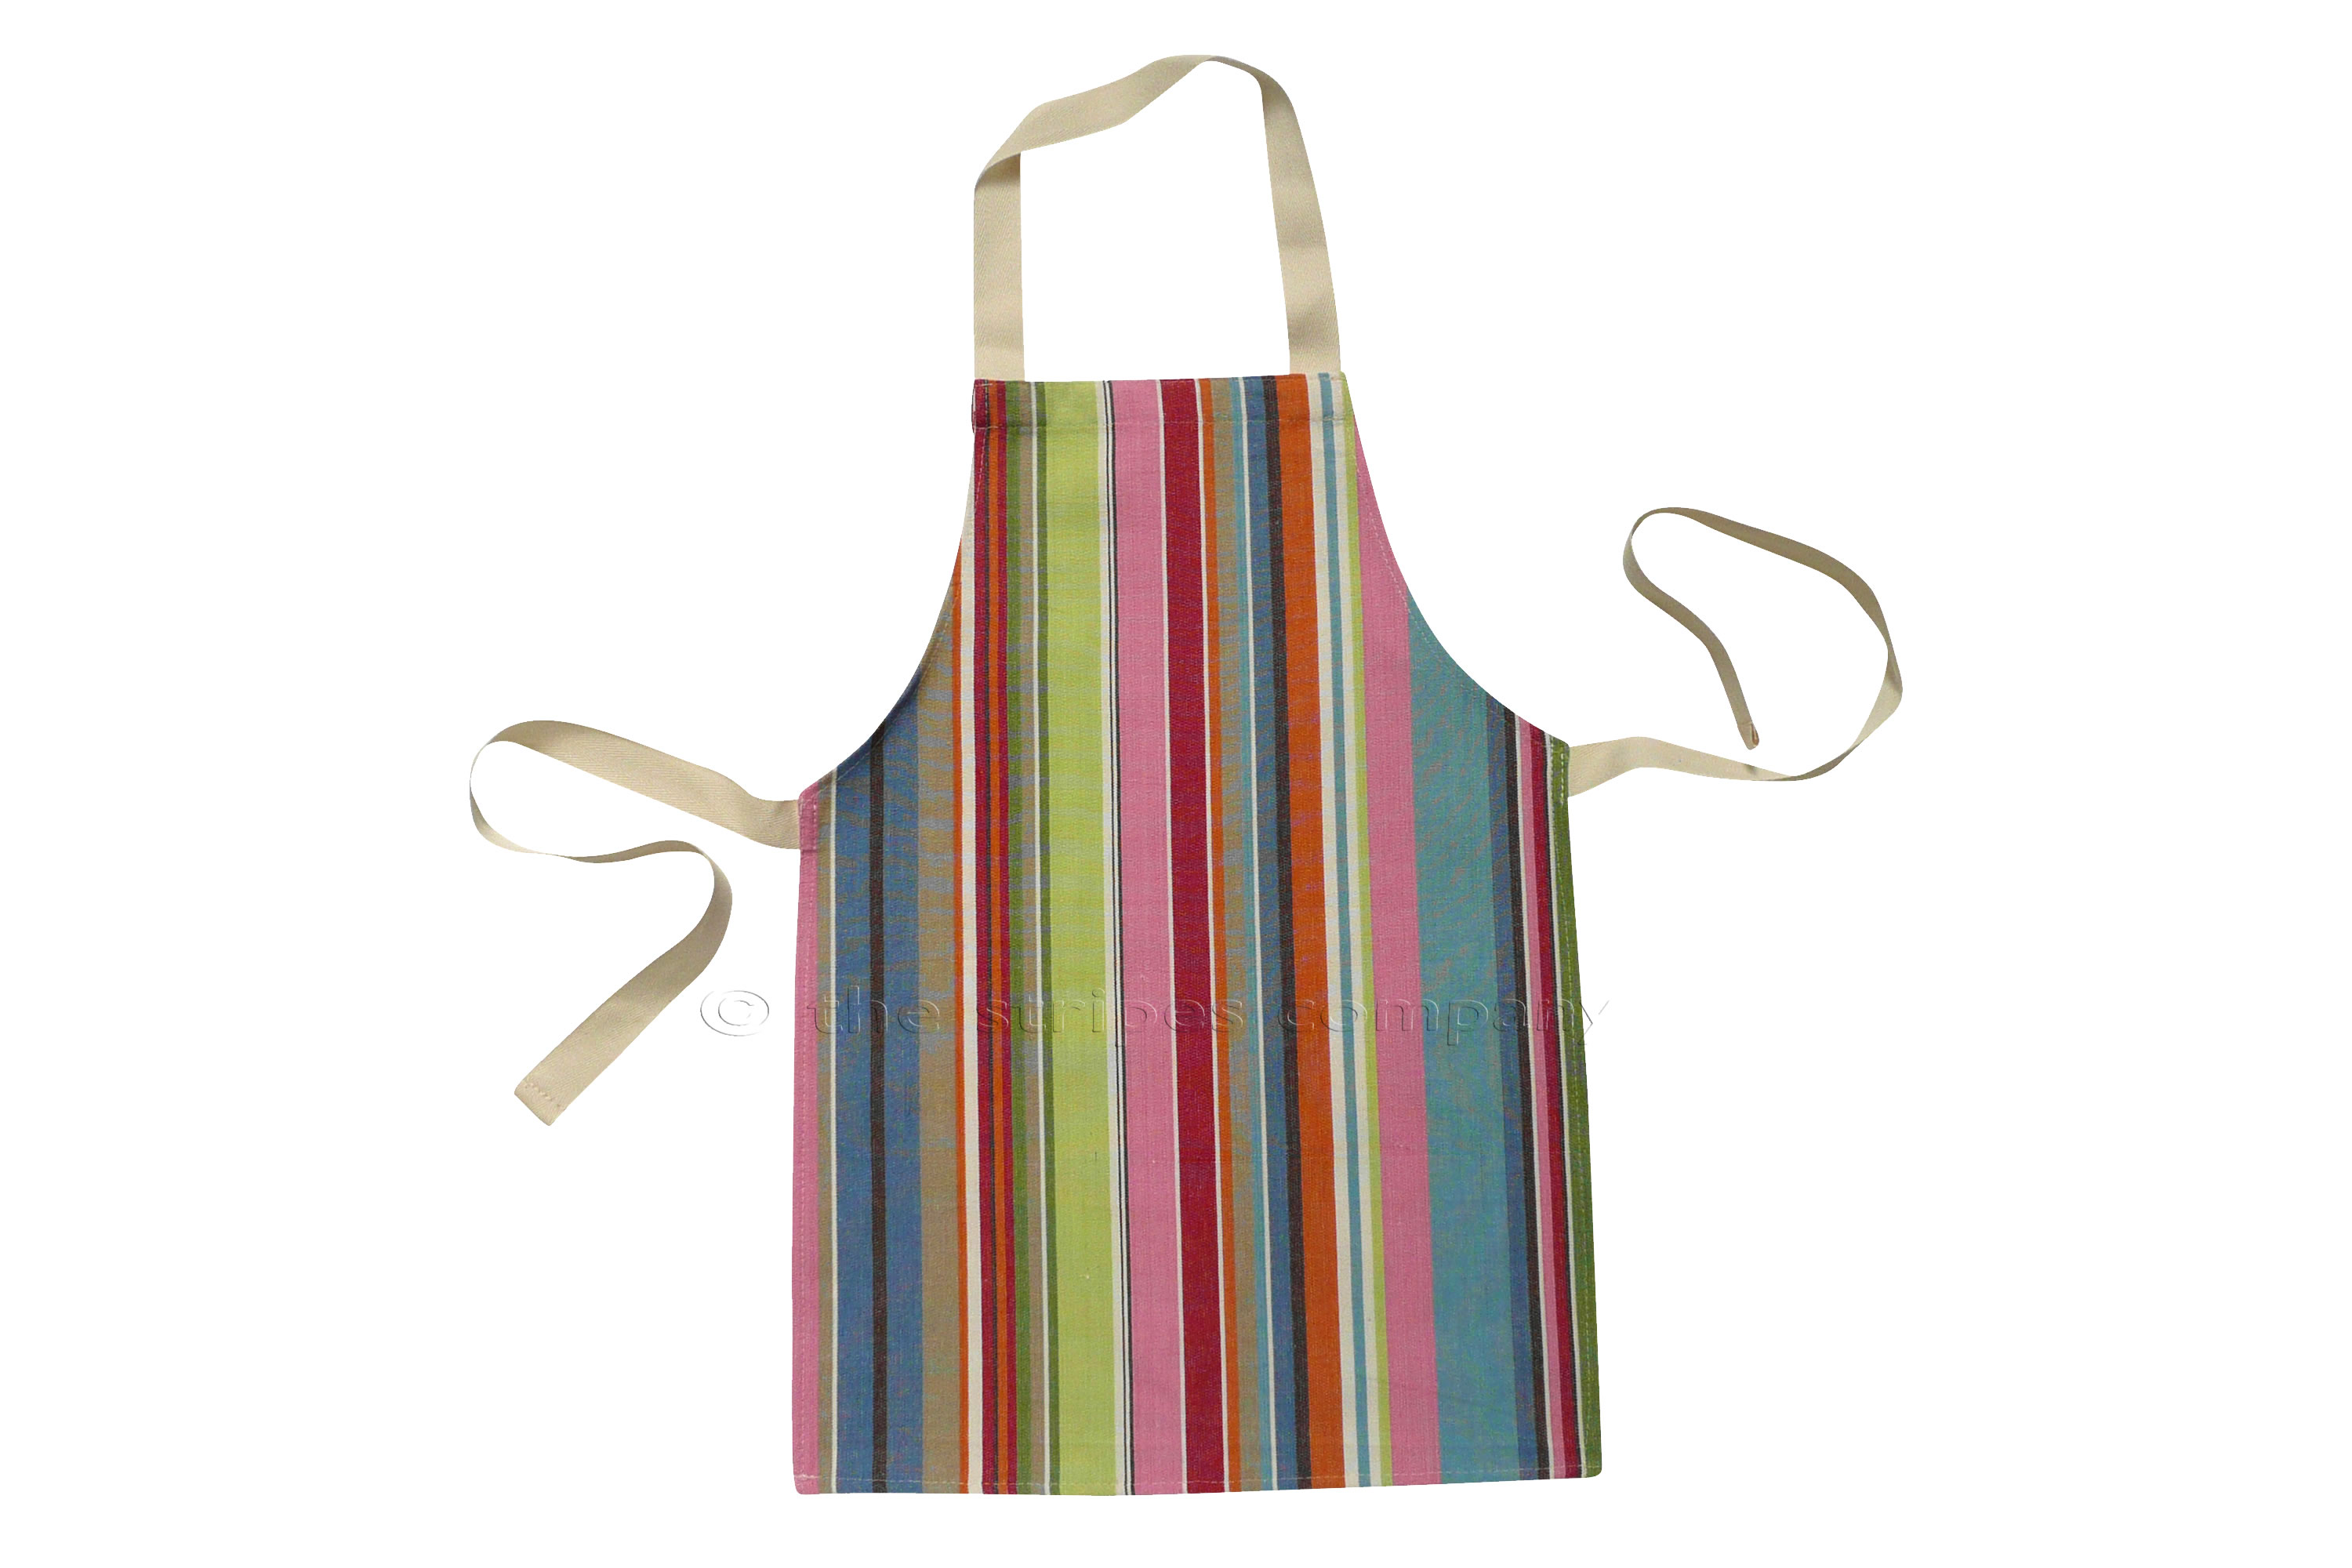 Blue Toddlers Aprons - Striped Aprons For Small Children Blue  Pink  Turquoise  Stripes